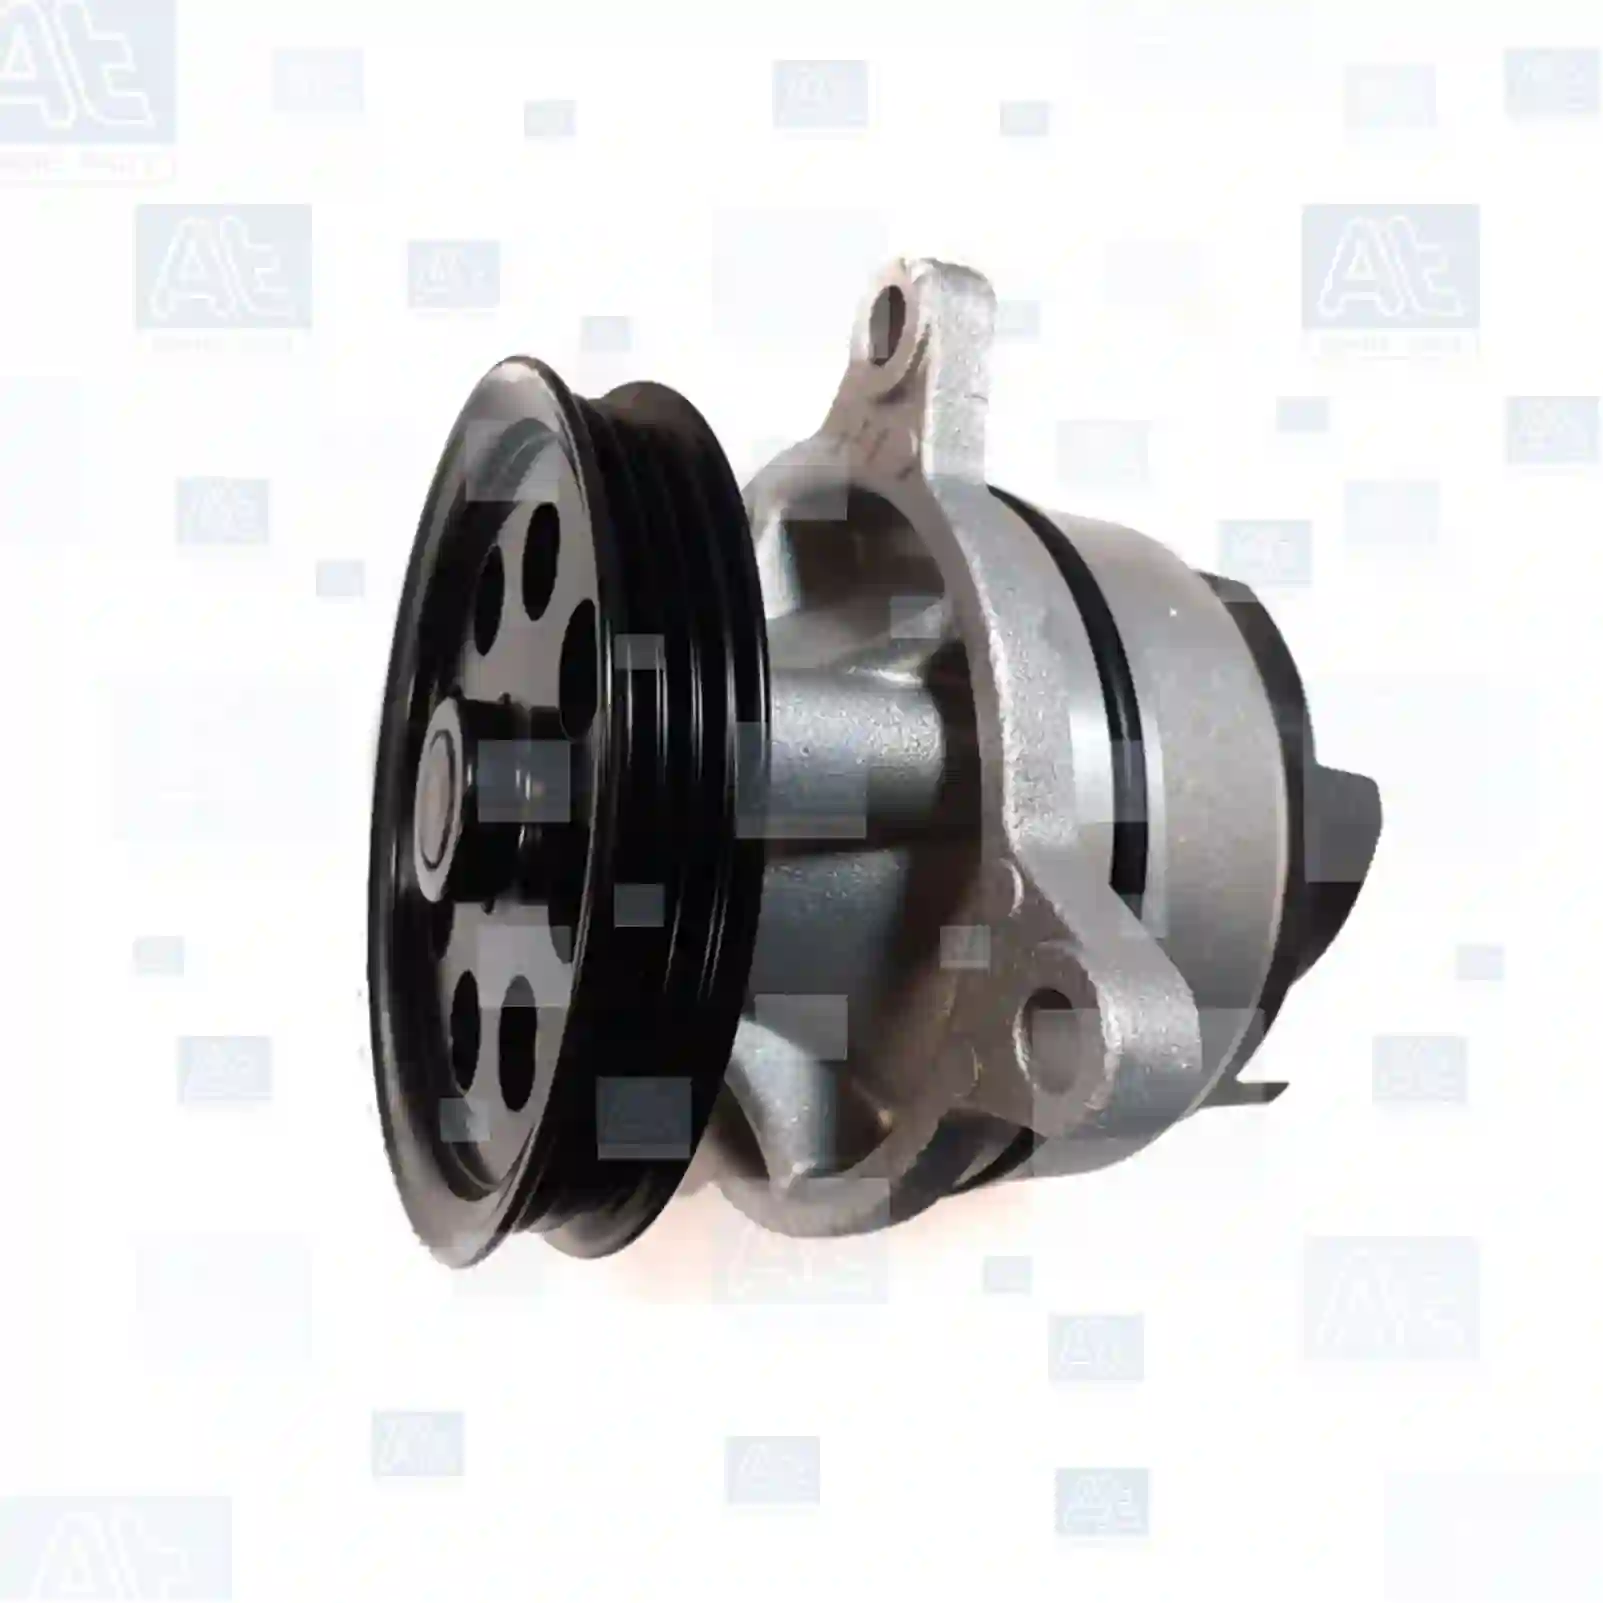 Water pump, without screws, at no 77707314, oem no: PA6016, 1116996, 1140004, 1143851, 1341835, 1347102, 1417825, 1477444, 1669335, 1929381, XS7Q-8591-AA, XS7Q-8K500-AE, 1116996, 1143851, 1341835, 1347102, 1417825, 1477444, XS7Q8K500AE, XS7Q8K500AH, XS7Q8K500AJ, XS7Q8K500AK, XS7Q8K500AL, XS7Q8K500AM, 2C2S40043, C2S40055, C2S43330, C2S48033, C2S548033, JD61028 At Spare Part | Engine, Accelerator Pedal, Camshaft, Connecting Rod, Crankcase, Crankshaft, Cylinder Head, Engine Suspension Mountings, Exhaust Manifold, Exhaust Gas Recirculation, Filter Kits, Flywheel Housing, General Overhaul Kits, Engine, Intake Manifold, Oil Cleaner, Oil Cooler, Oil Filter, Oil Pump, Oil Sump, Piston & Liner, Sensor & Switch, Timing Case, Turbocharger, Cooling System, Belt Tensioner, Coolant Filter, Coolant Pipe, Corrosion Prevention Agent, Drive, Expansion Tank, Fan, Intercooler, Monitors & Gauges, Radiator, Thermostat, V-Belt / Timing belt, Water Pump, Fuel System, Electronical Injector Unit, Feed Pump, Fuel Filter, cpl., Fuel Gauge Sender,  Fuel Line, Fuel Pump, Fuel Tank, Injection Line Kit, Injection Pump, Exhaust System, Clutch & Pedal, Gearbox, Propeller Shaft, Axles, Brake System, Hubs & Wheels, Suspension, Leaf Spring, Universal Parts / Accessories, Steering, Electrical System, Cabin Water pump, without screws, at no 77707314, oem no: PA6016, 1116996, 1140004, 1143851, 1341835, 1347102, 1417825, 1477444, 1669335, 1929381, XS7Q-8591-AA, XS7Q-8K500-AE, 1116996, 1143851, 1341835, 1347102, 1417825, 1477444, XS7Q8K500AE, XS7Q8K500AH, XS7Q8K500AJ, XS7Q8K500AK, XS7Q8K500AL, XS7Q8K500AM, 2C2S40043, C2S40055, C2S43330, C2S48033, C2S548033, JD61028 At Spare Part | Engine, Accelerator Pedal, Camshaft, Connecting Rod, Crankcase, Crankshaft, Cylinder Head, Engine Suspension Mountings, Exhaust Manifold, Exhaust Gas Recirculation, Filter Kits, Flywheel Housing, General Overhaul Kits, Engine, Intake Manifold, Oil Cleaner, Oil Cooler, Oil Filter, Oil Pump, Oil Sump, Piston & Liner, Sensor & Switch, Timing Case, Turbocharger, Cooling System, Belt Tensioner, Coolant Filter, Coolant Pipe, Corrosion Prevention Agent, Drive, Expansion Tank, Fan, Intercooler, Monitors & Gauges, Radiator, Thermostat, V-Belt / Timing belt, Water Pump, Fuel System, Electronical Injector Unit, Feed Pump, Fuel Filter, cpl., Fuel Gauge Sender,  Fuel Line, Fuel Pump, Fuel Tank, Injection Line Kit, Injection Pump, Exhaust System, Clutch & Pedal, Gearbox, Propeller Shaft, Axles, Brake System, Hubs & Wheels, Suspension, Leaf Spring, Universal Parts / Accessories, Steering, Electrical System, Cabin